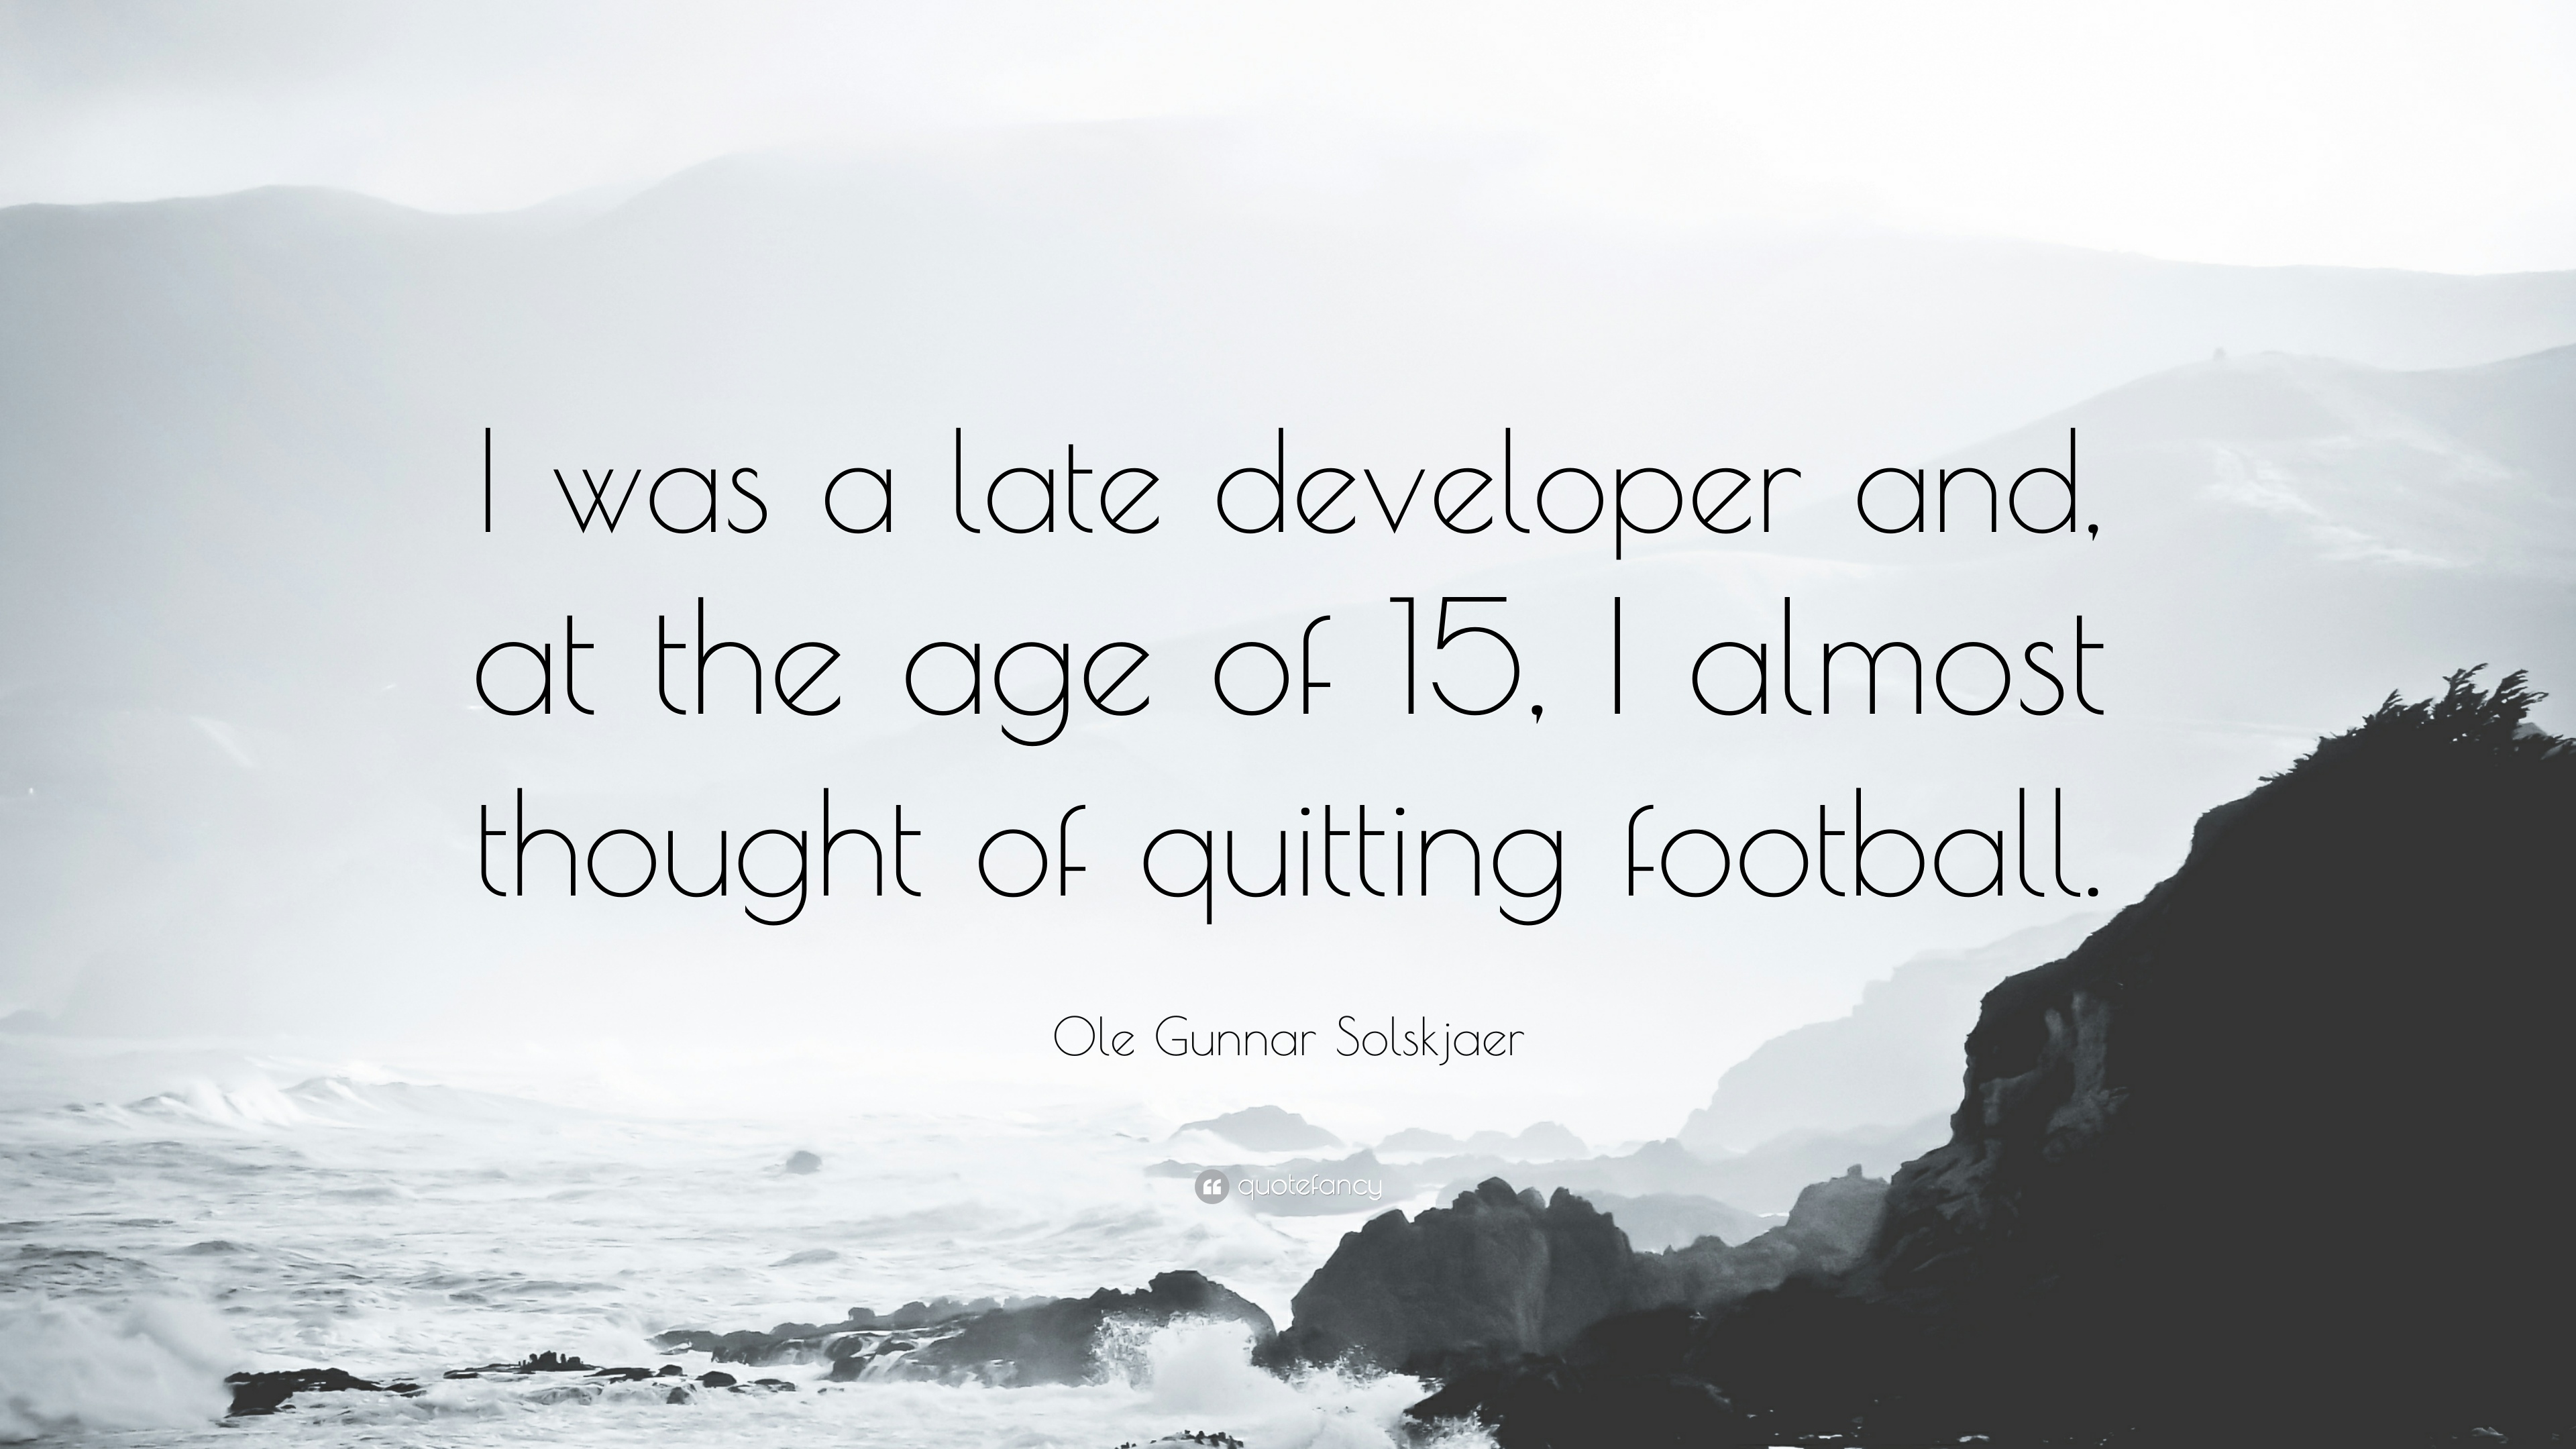 Ole Gunnar Solskjaer Quote: “I was a late developer and, at the age